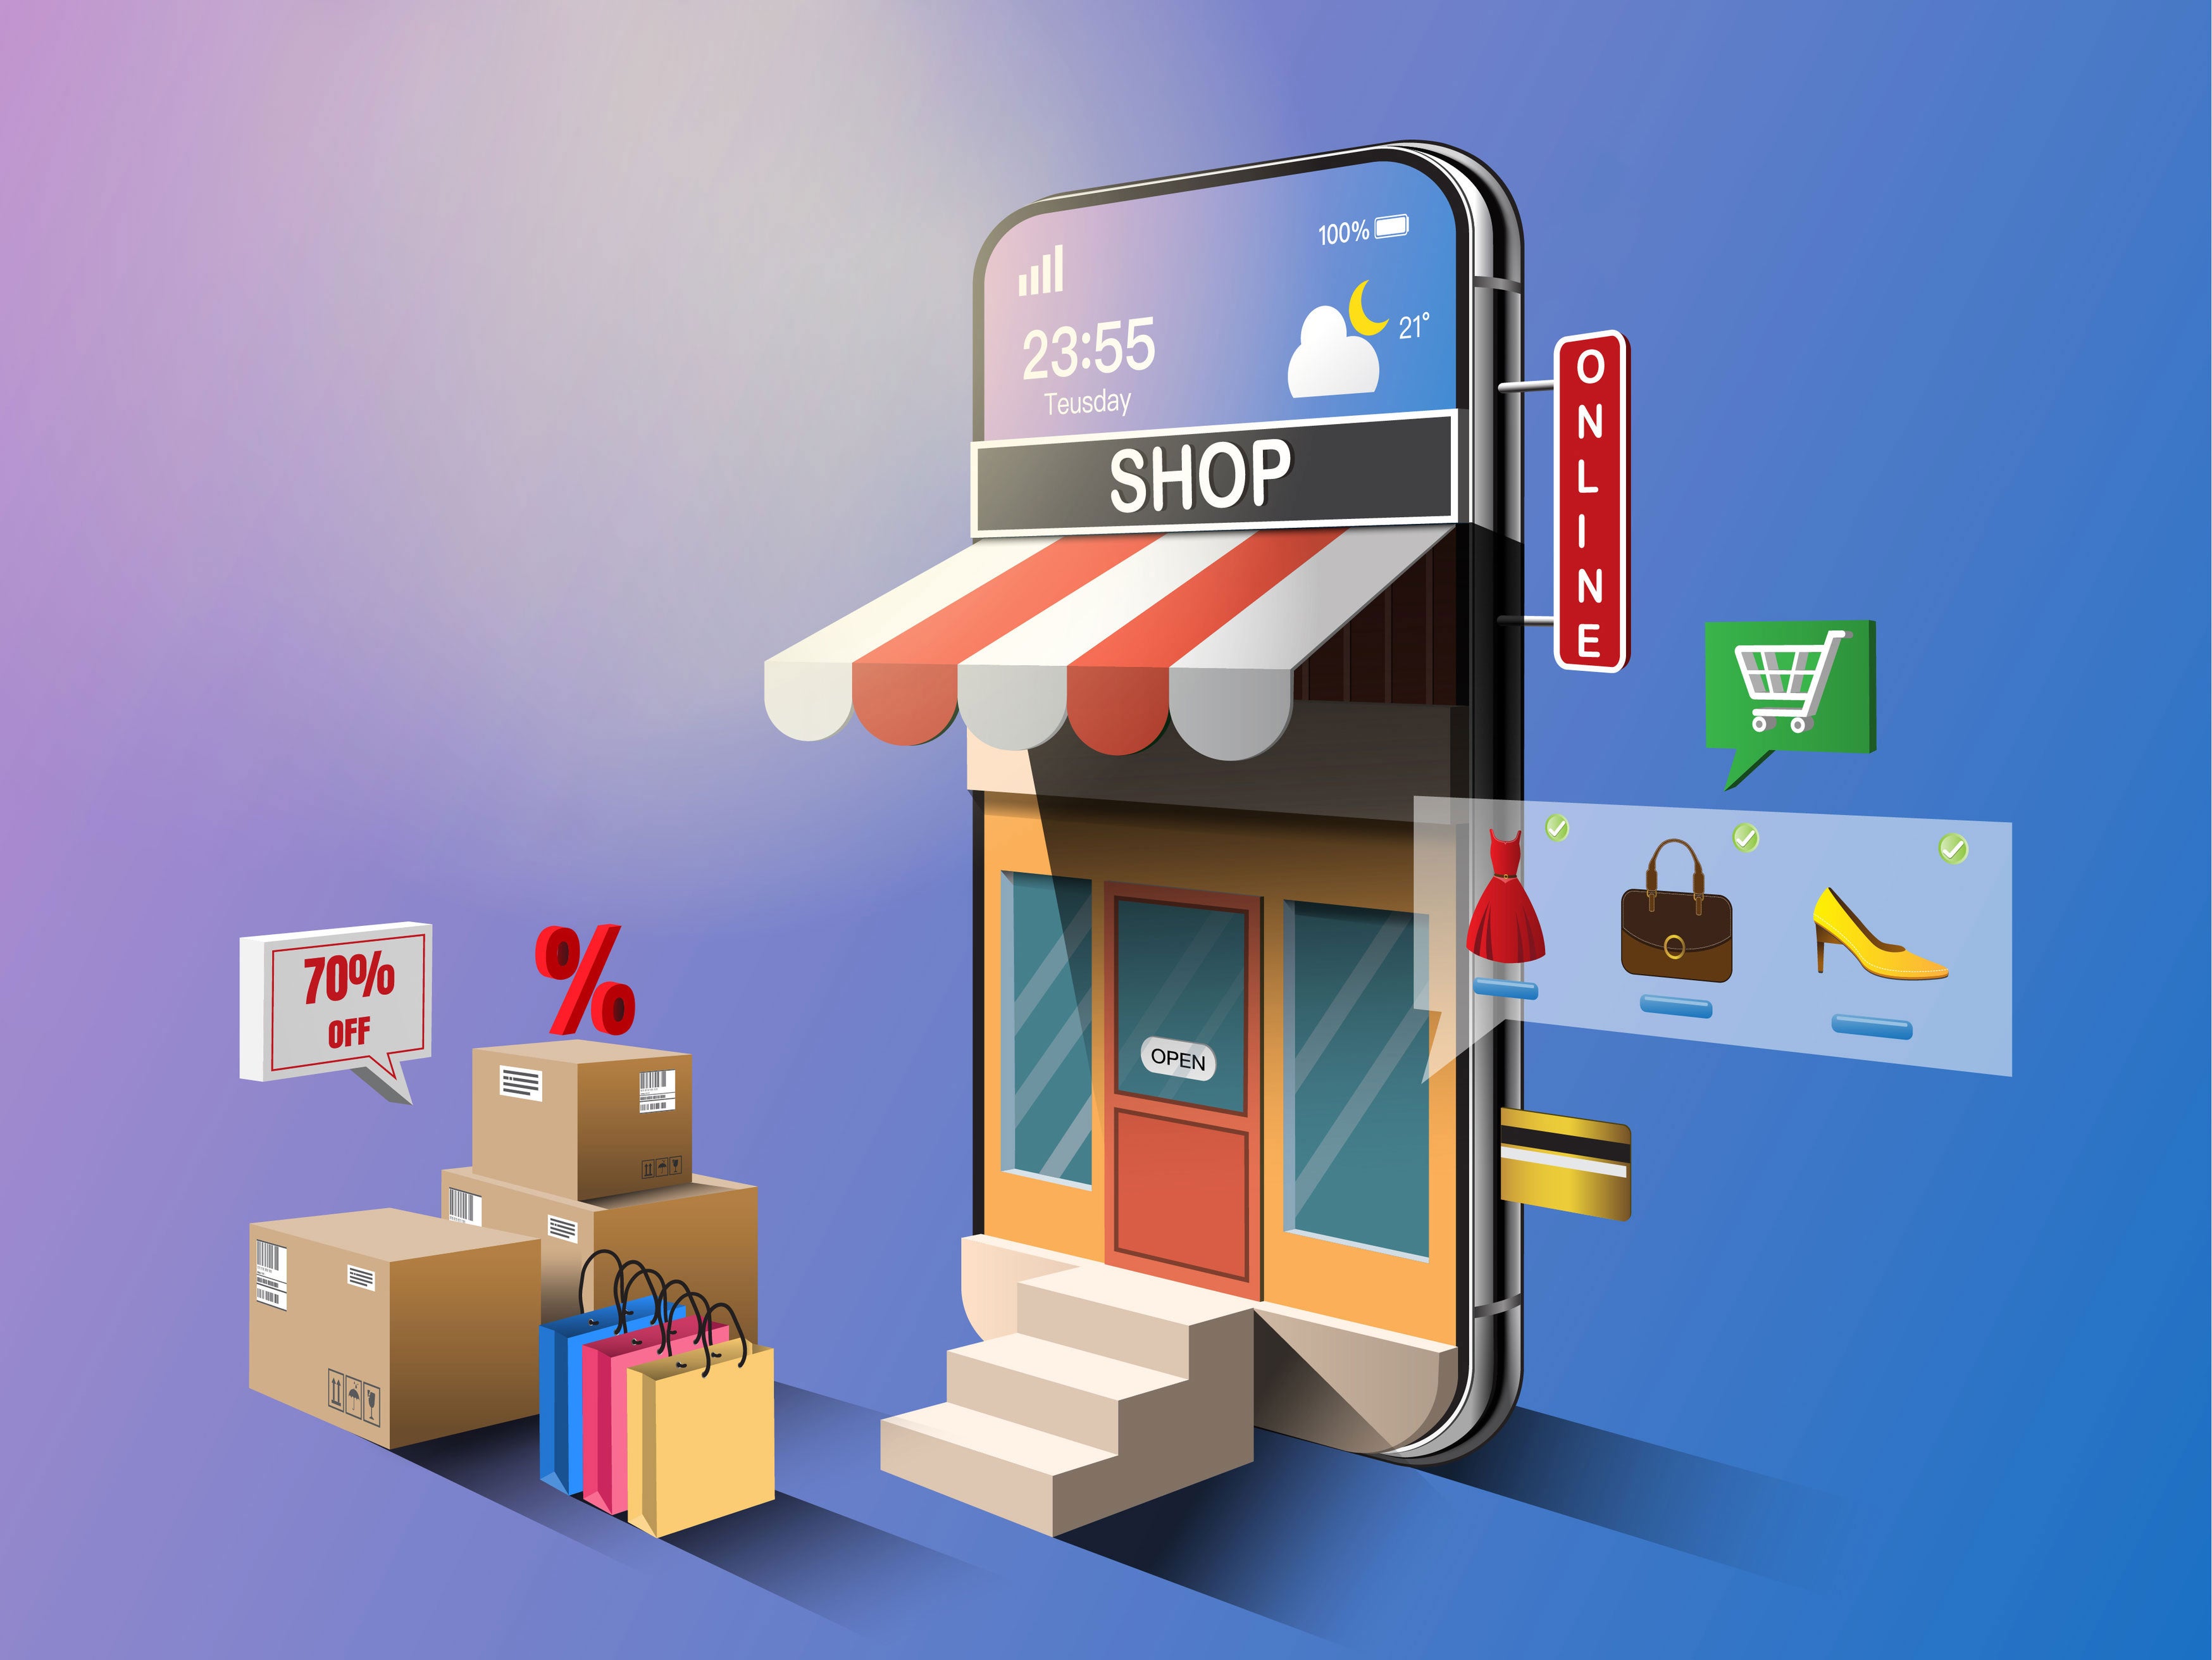 Legal tips for e-commerce businesses: When does a ’limited time offer’ become misleading? (Part 3)